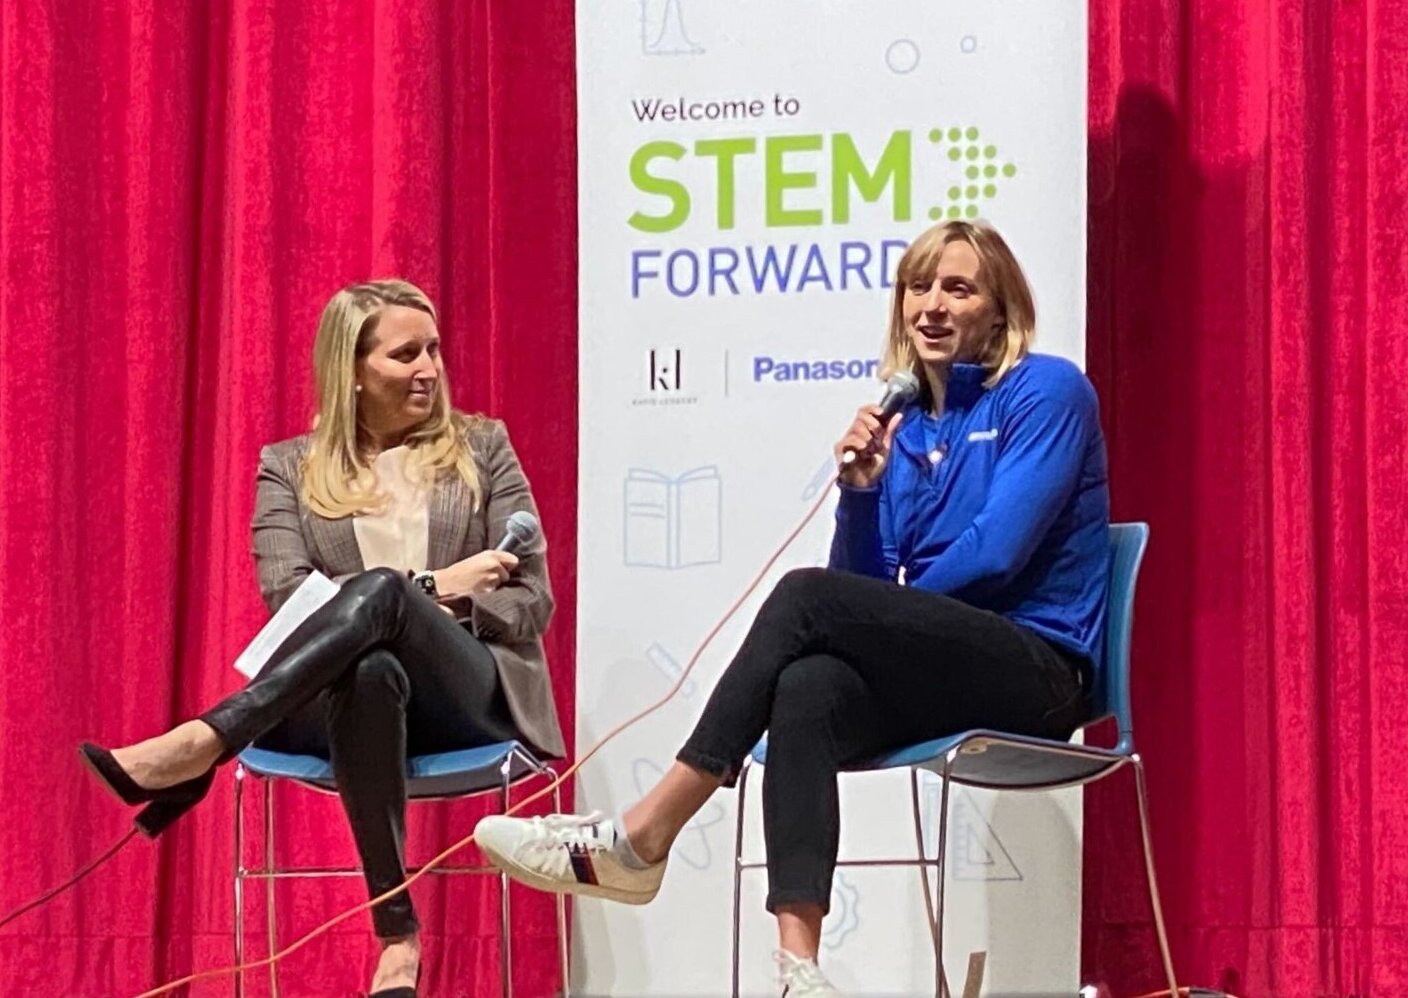 Olympic swimmer promotes STEM education at DC school